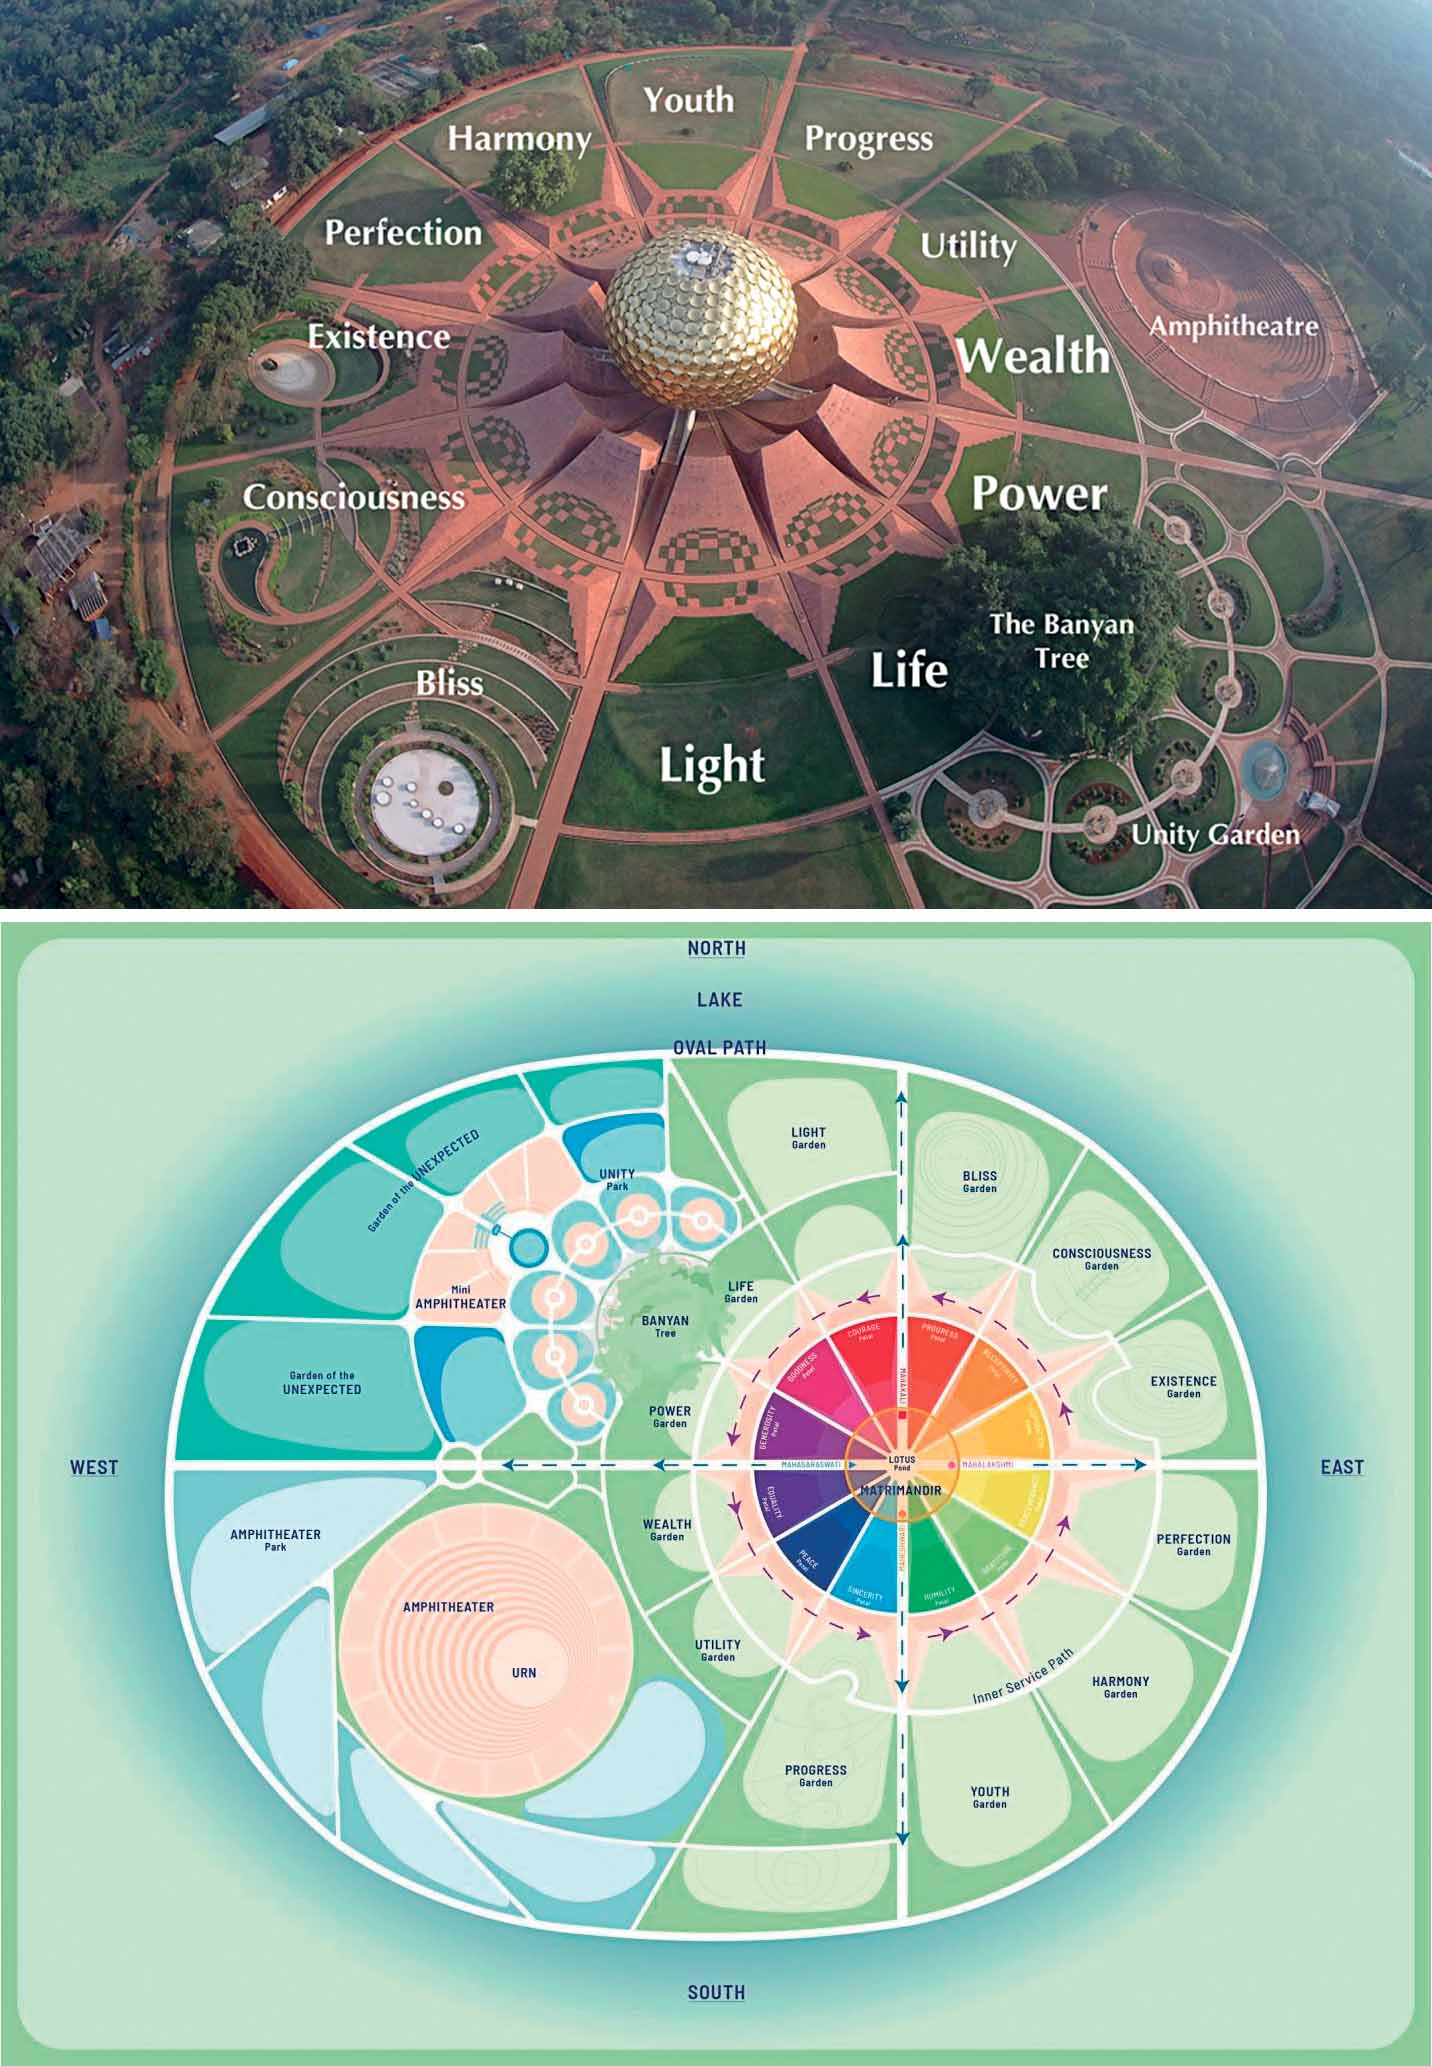 manifesting-auroville-galaxy-plan-matrimandir-aurovillie-conceptualised-late-french-architect-roger-anger-physical-core-with-centre-called-peace-area